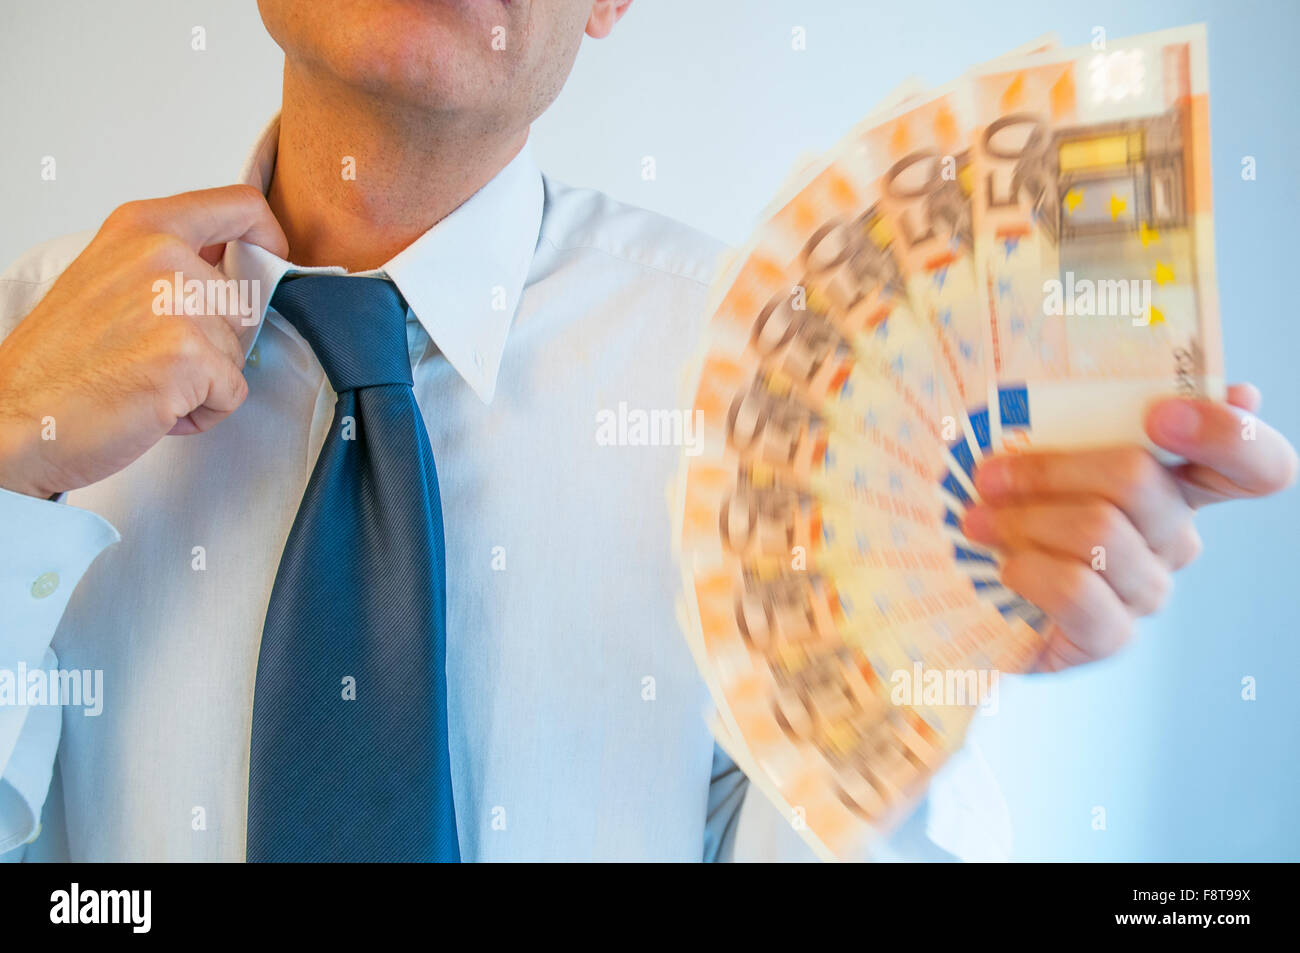 Man fanning himself with bank notes. Close view. Stock Photo